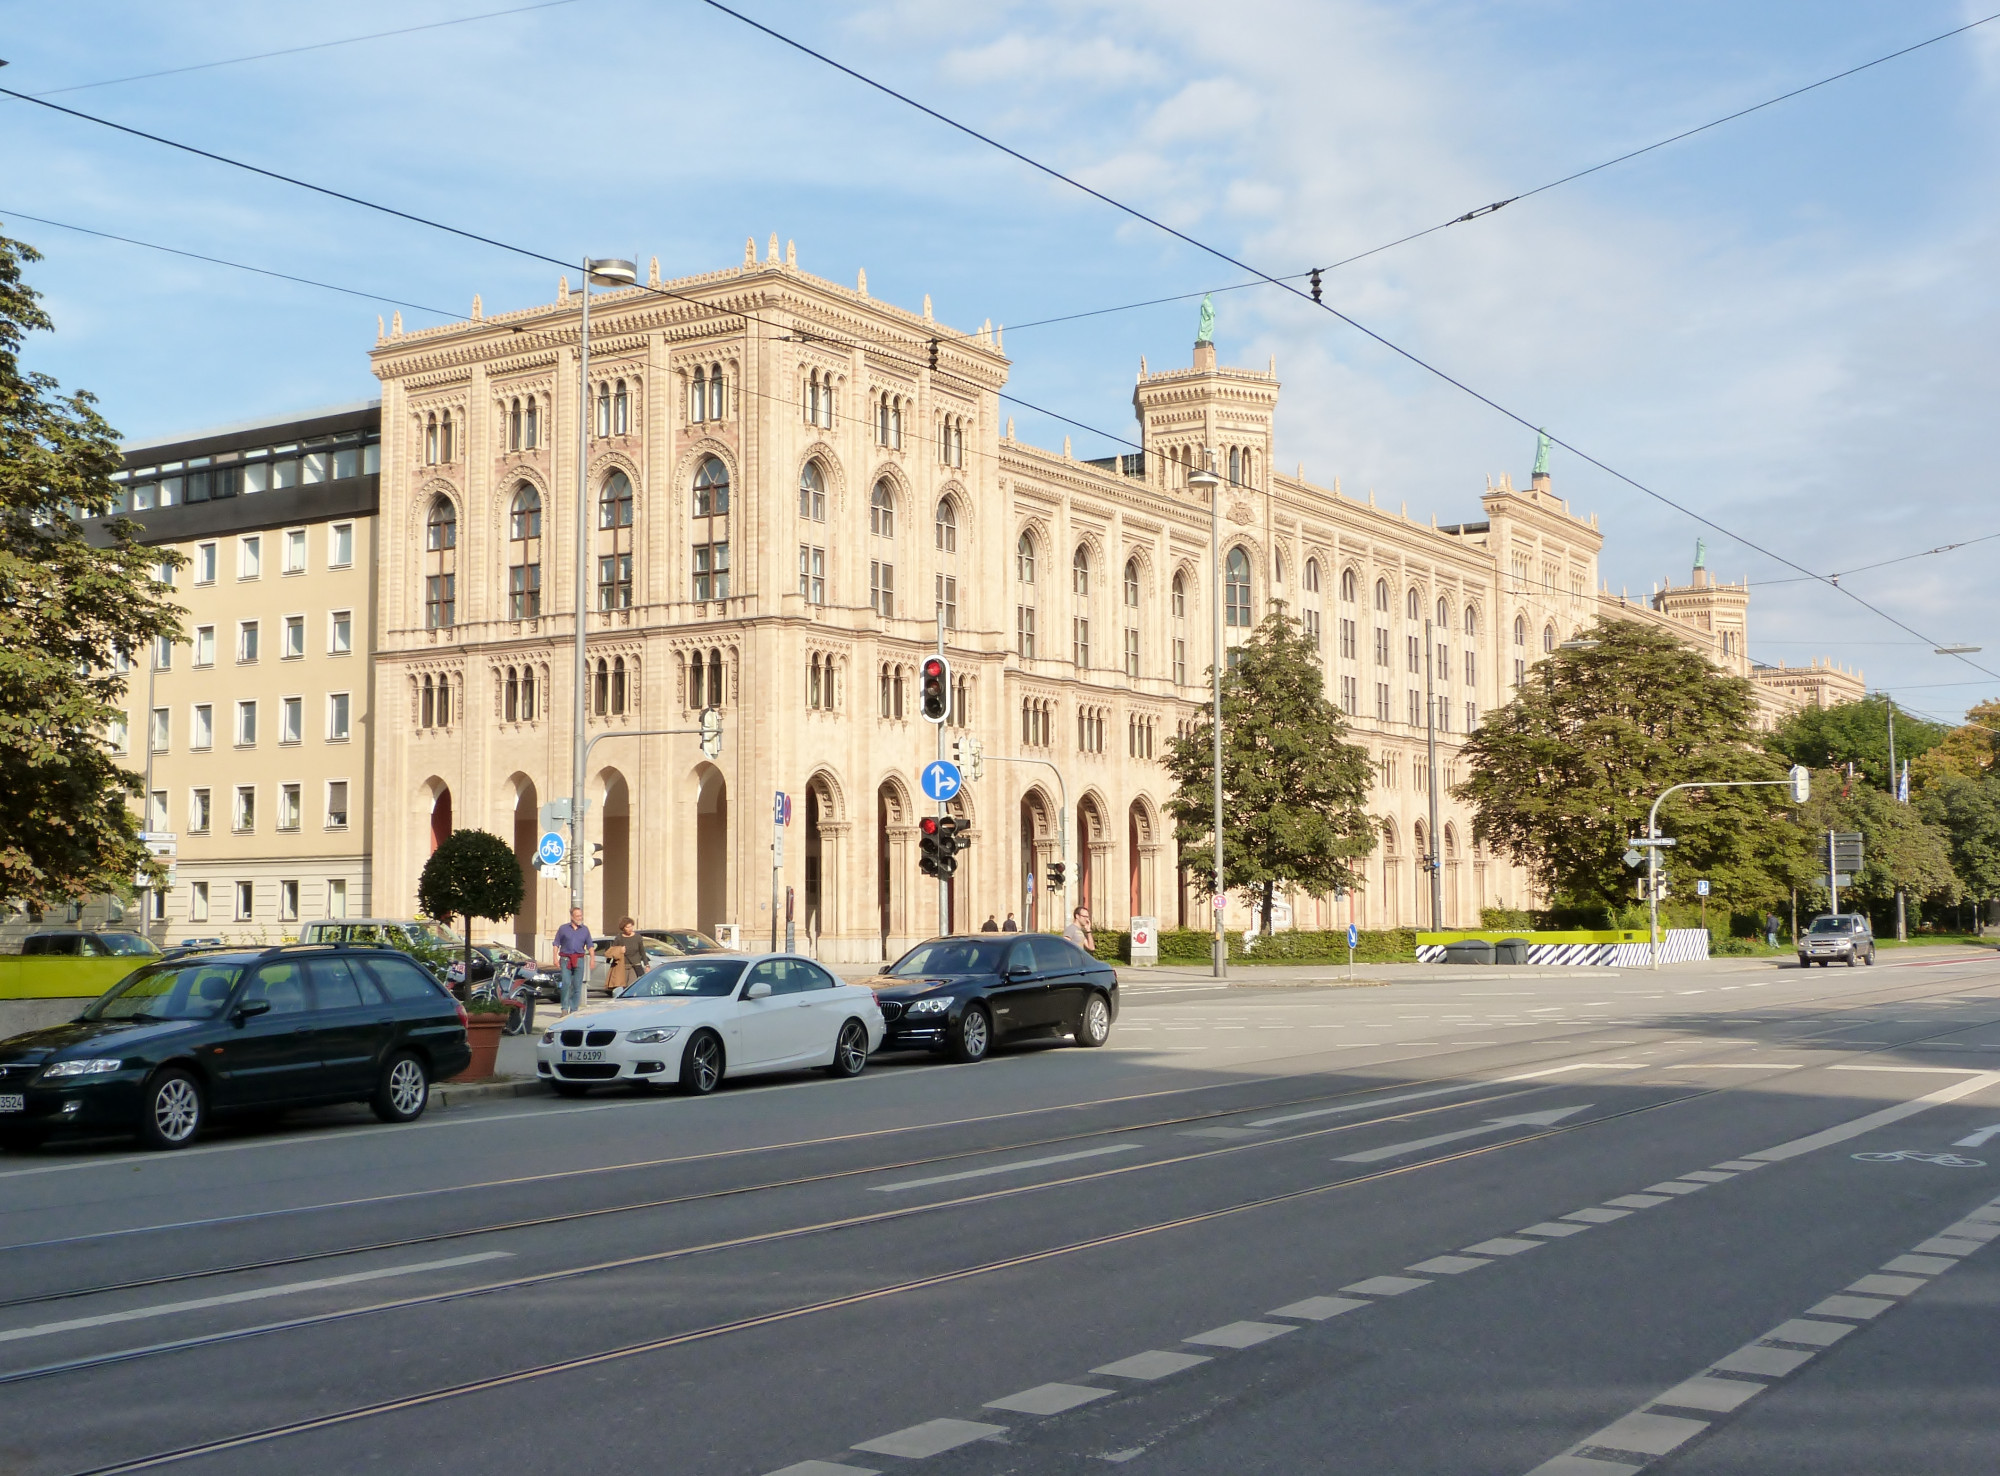 District Government of Upper Bavaria Building